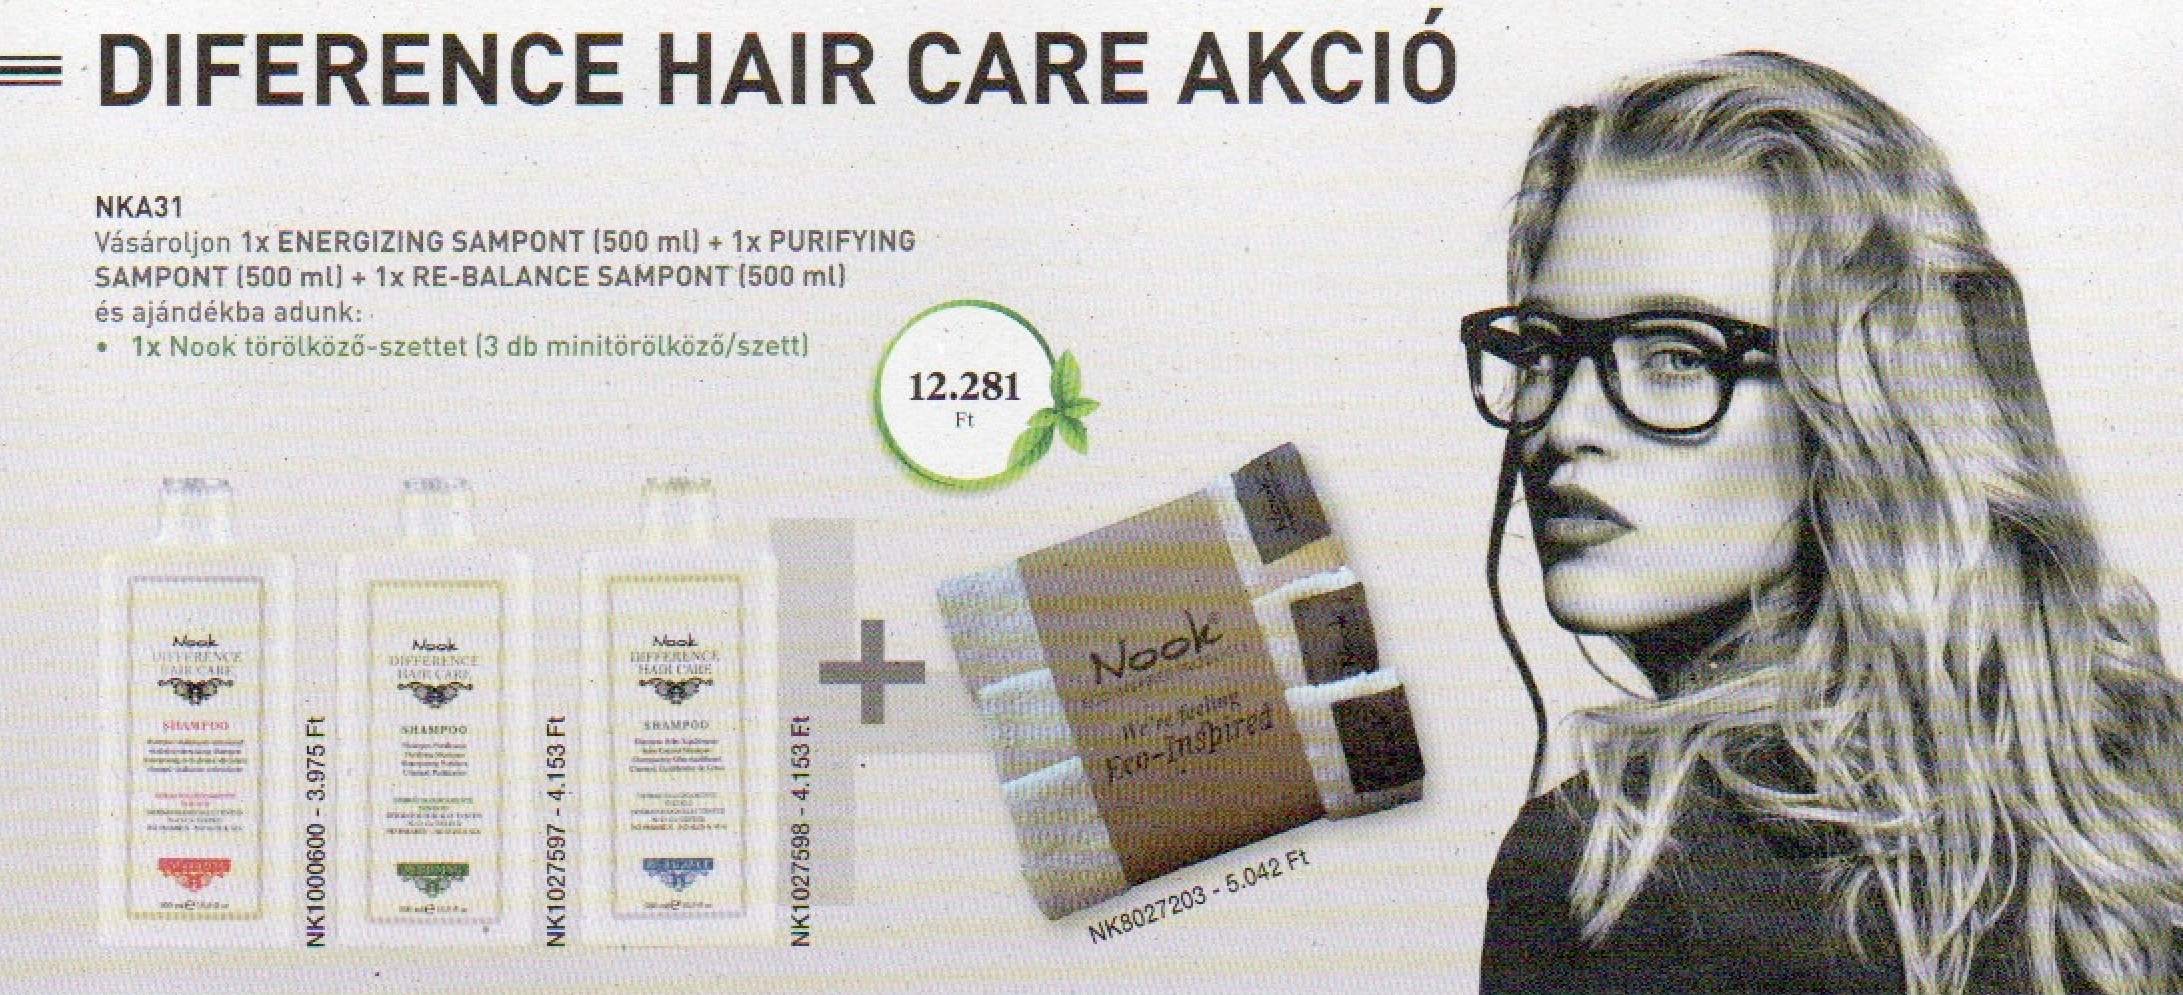 NKA31 NOOK DIFFERENCE HAIR CARE 3+1 AKCIÓ